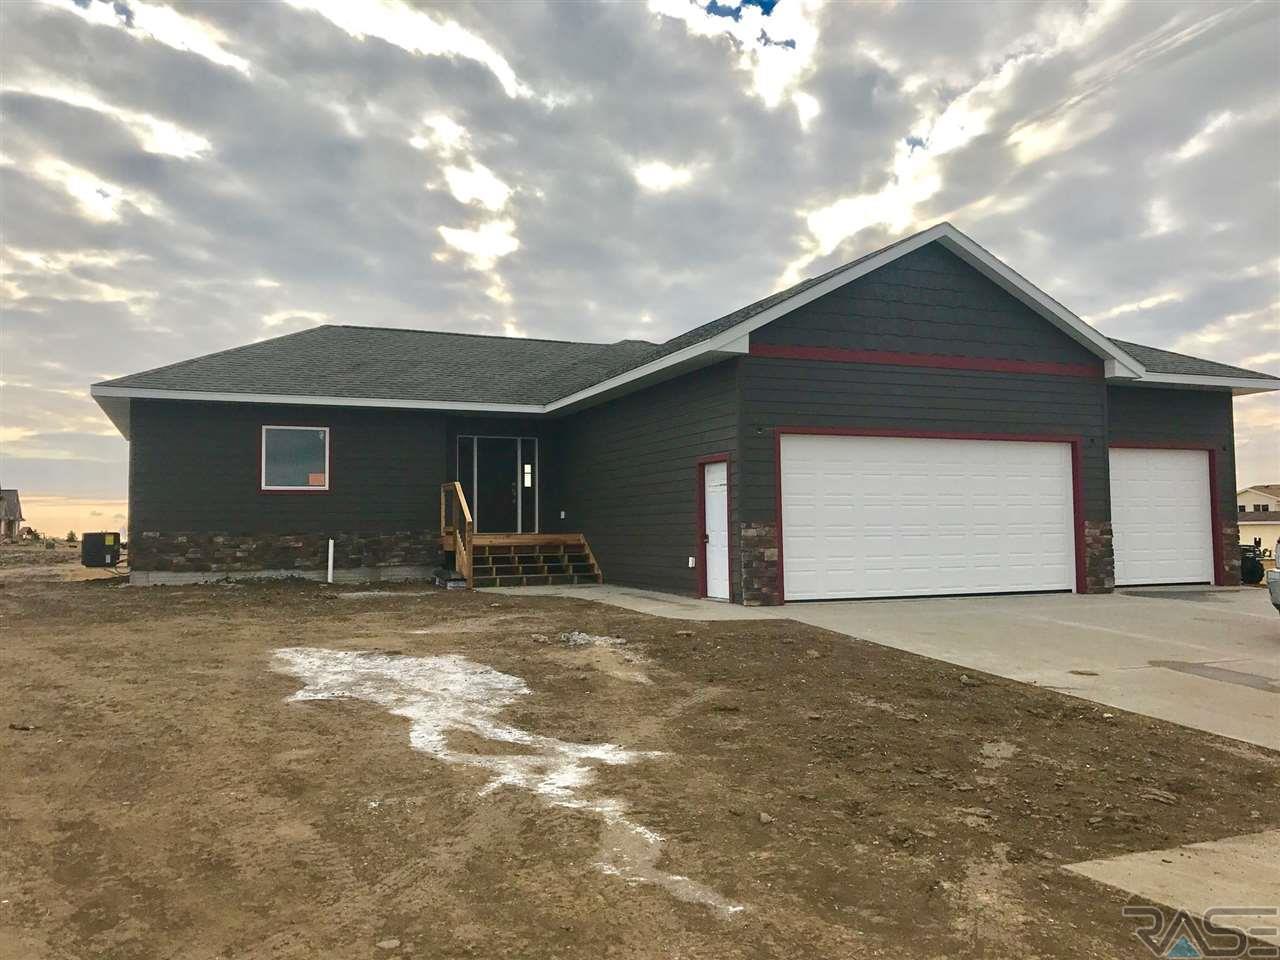 New 4 Bed, 3 Bath Ranch Home Now For Sale!